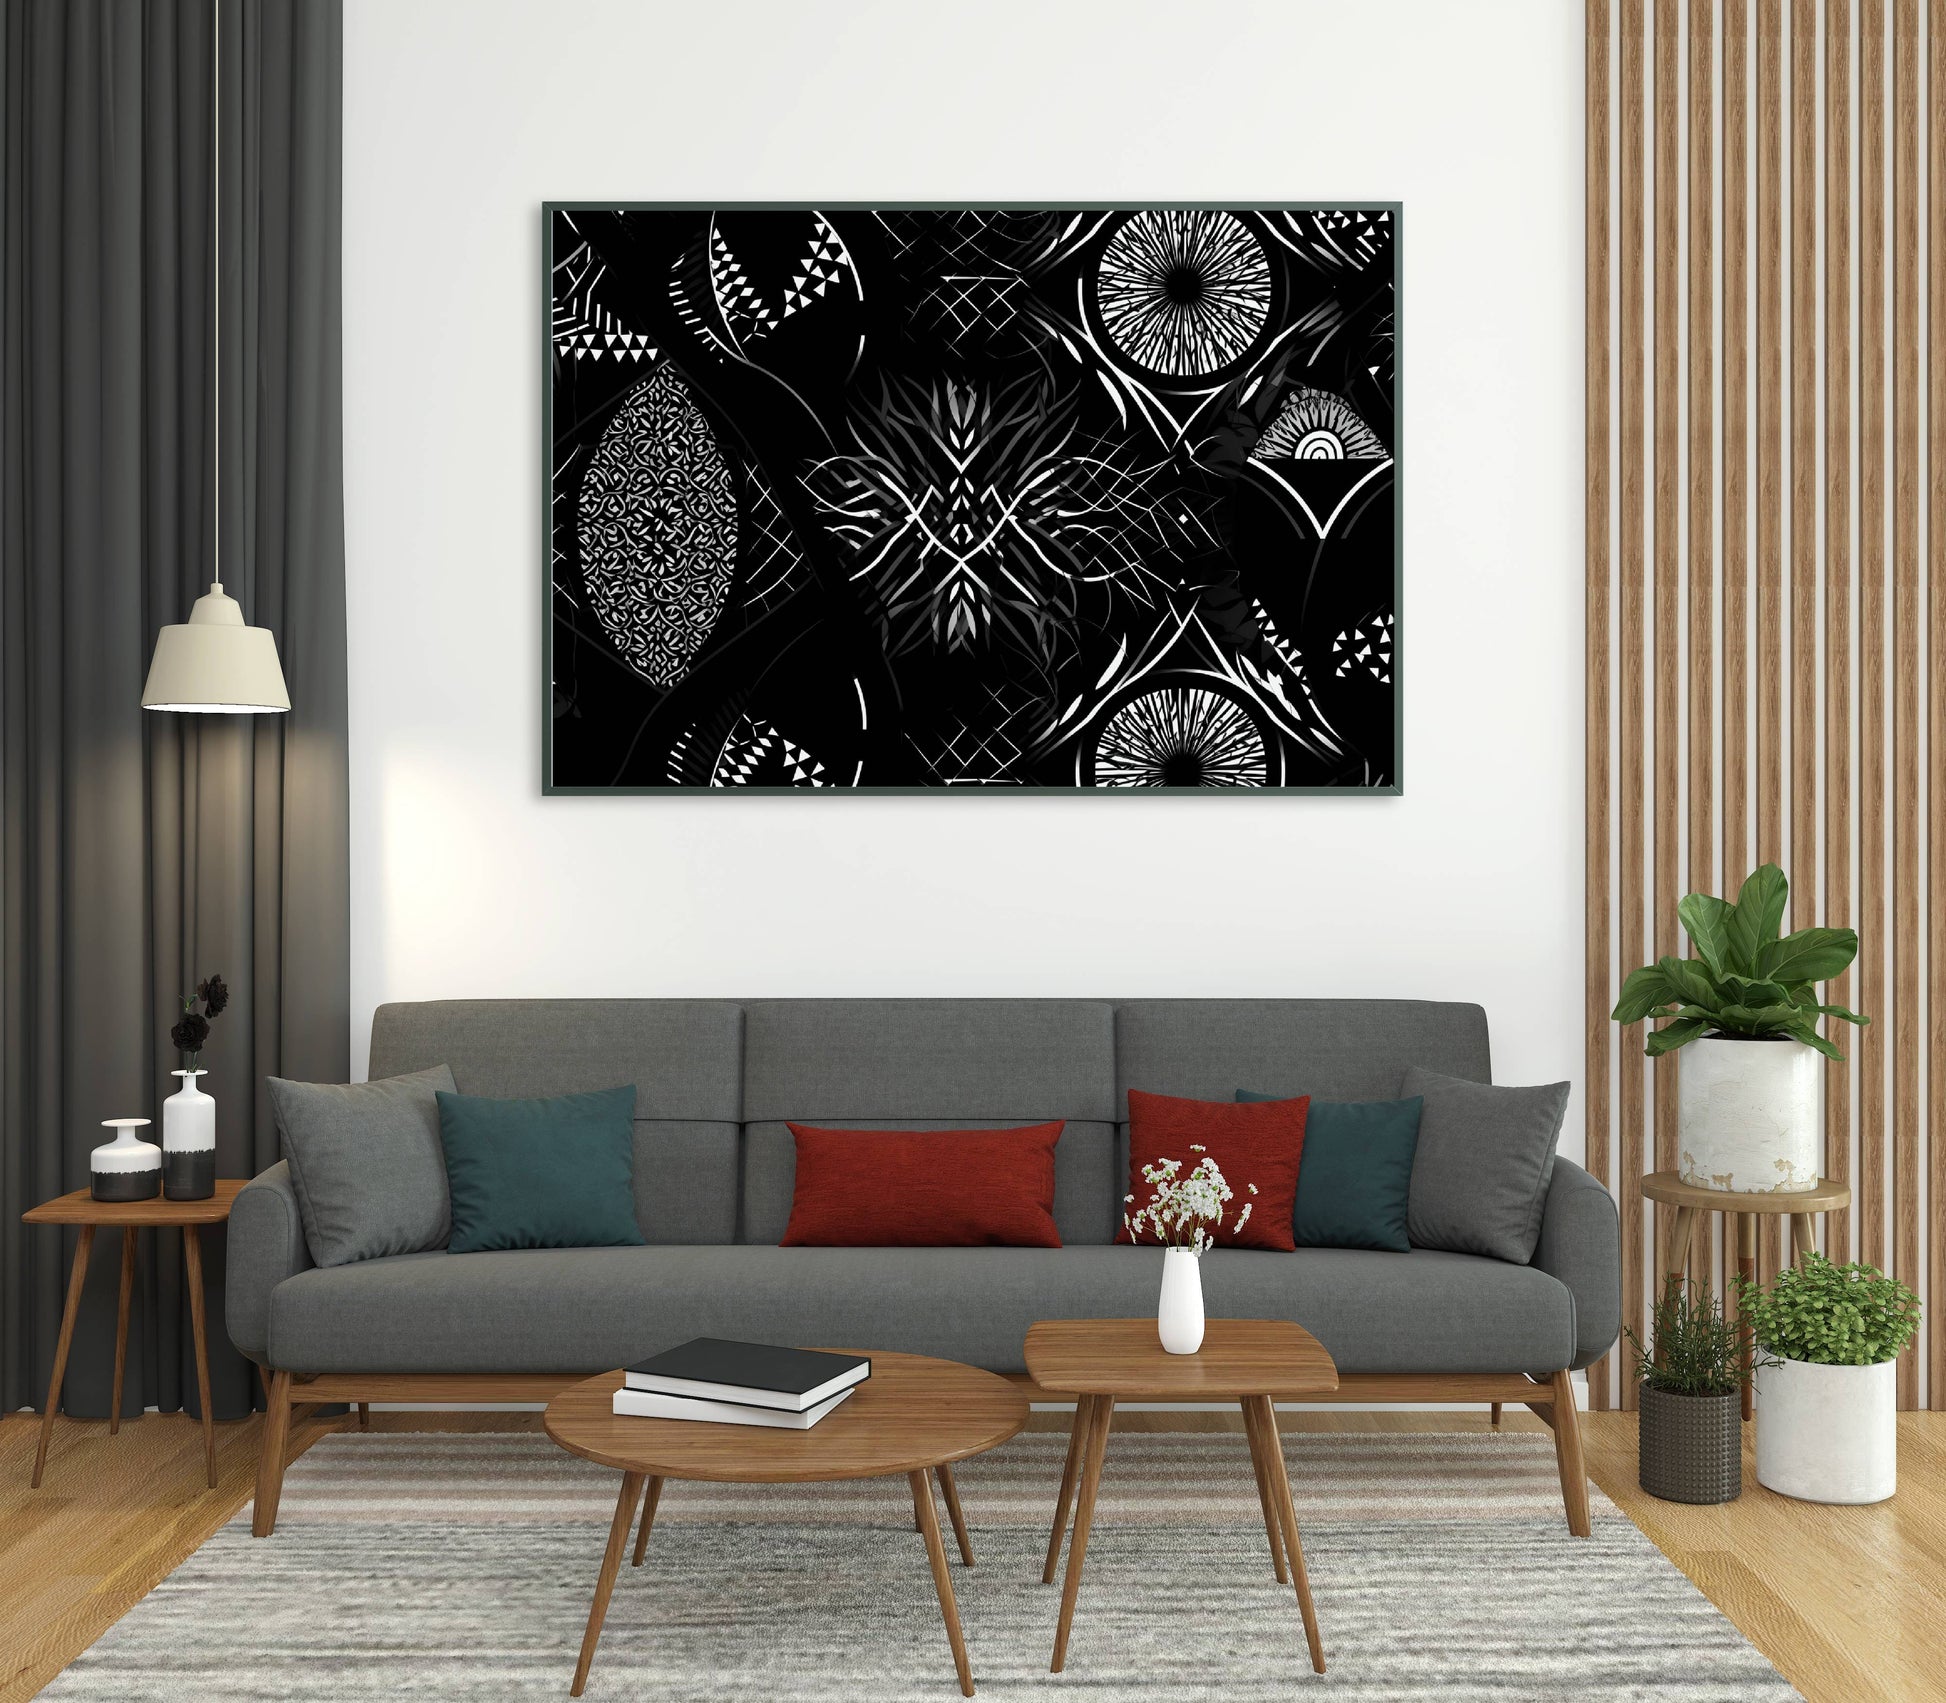 framed black and white abstract art print - front angle